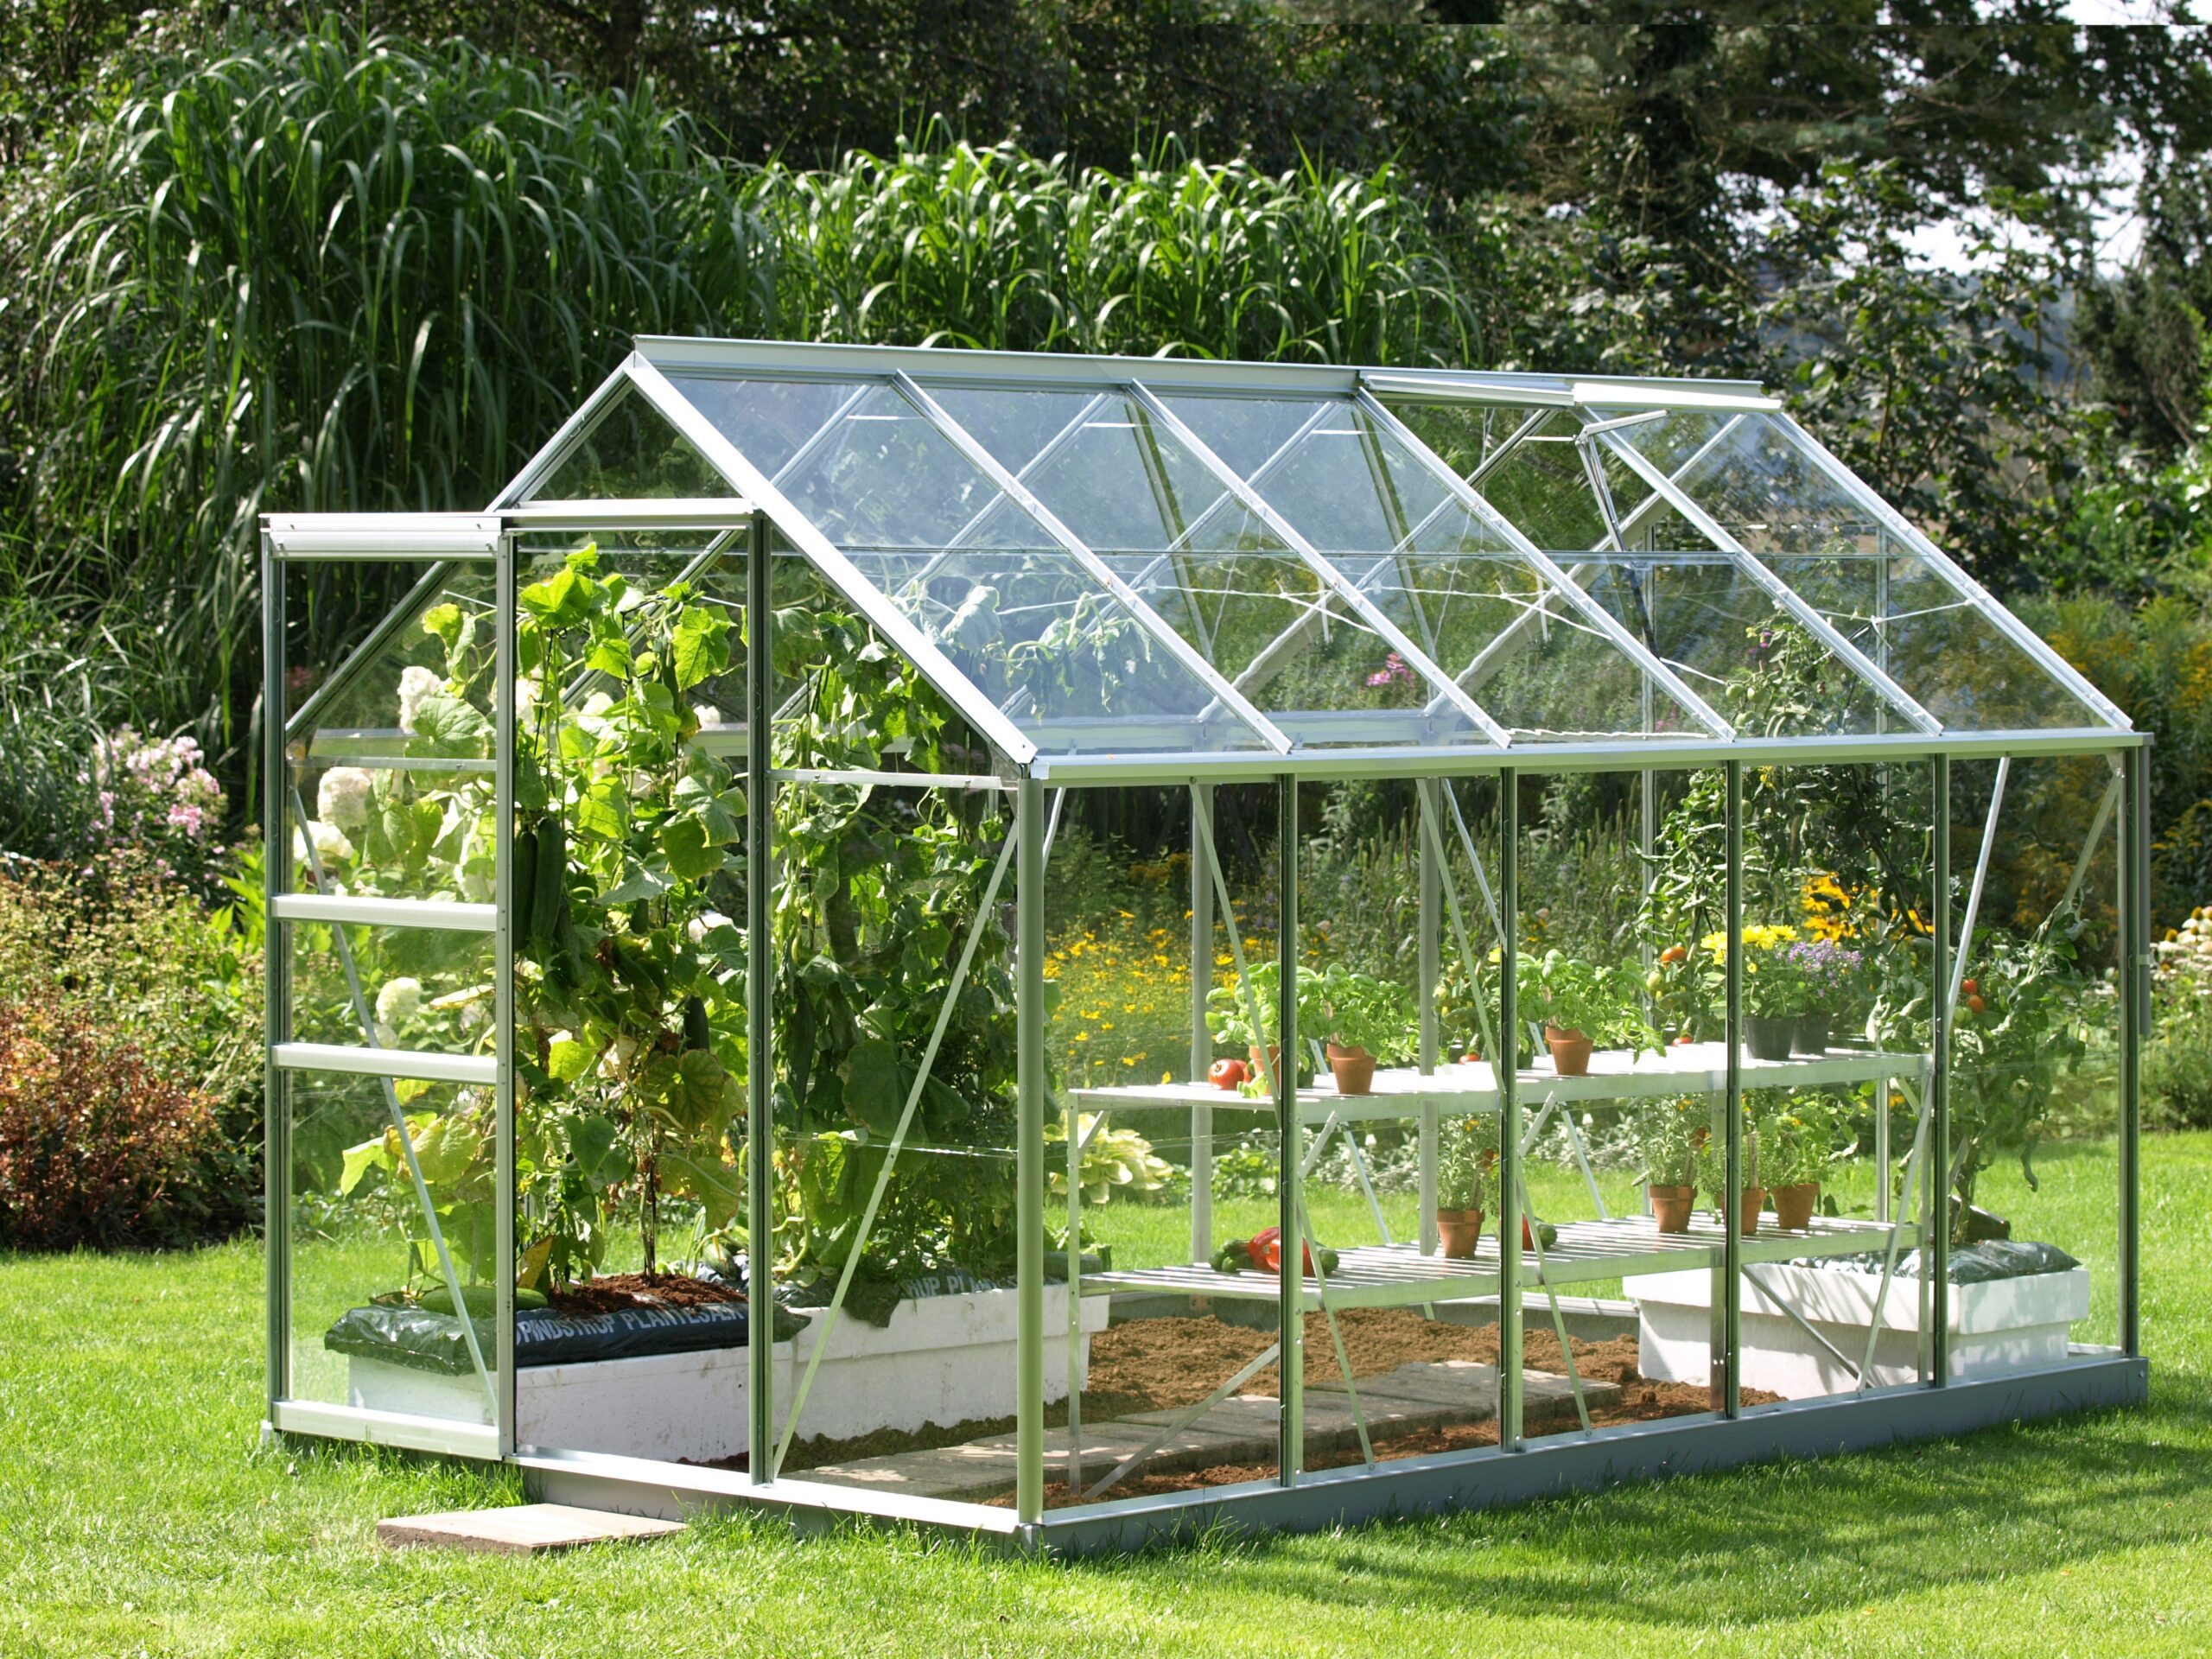 What You Need To Know About Greenhouse For Sale?